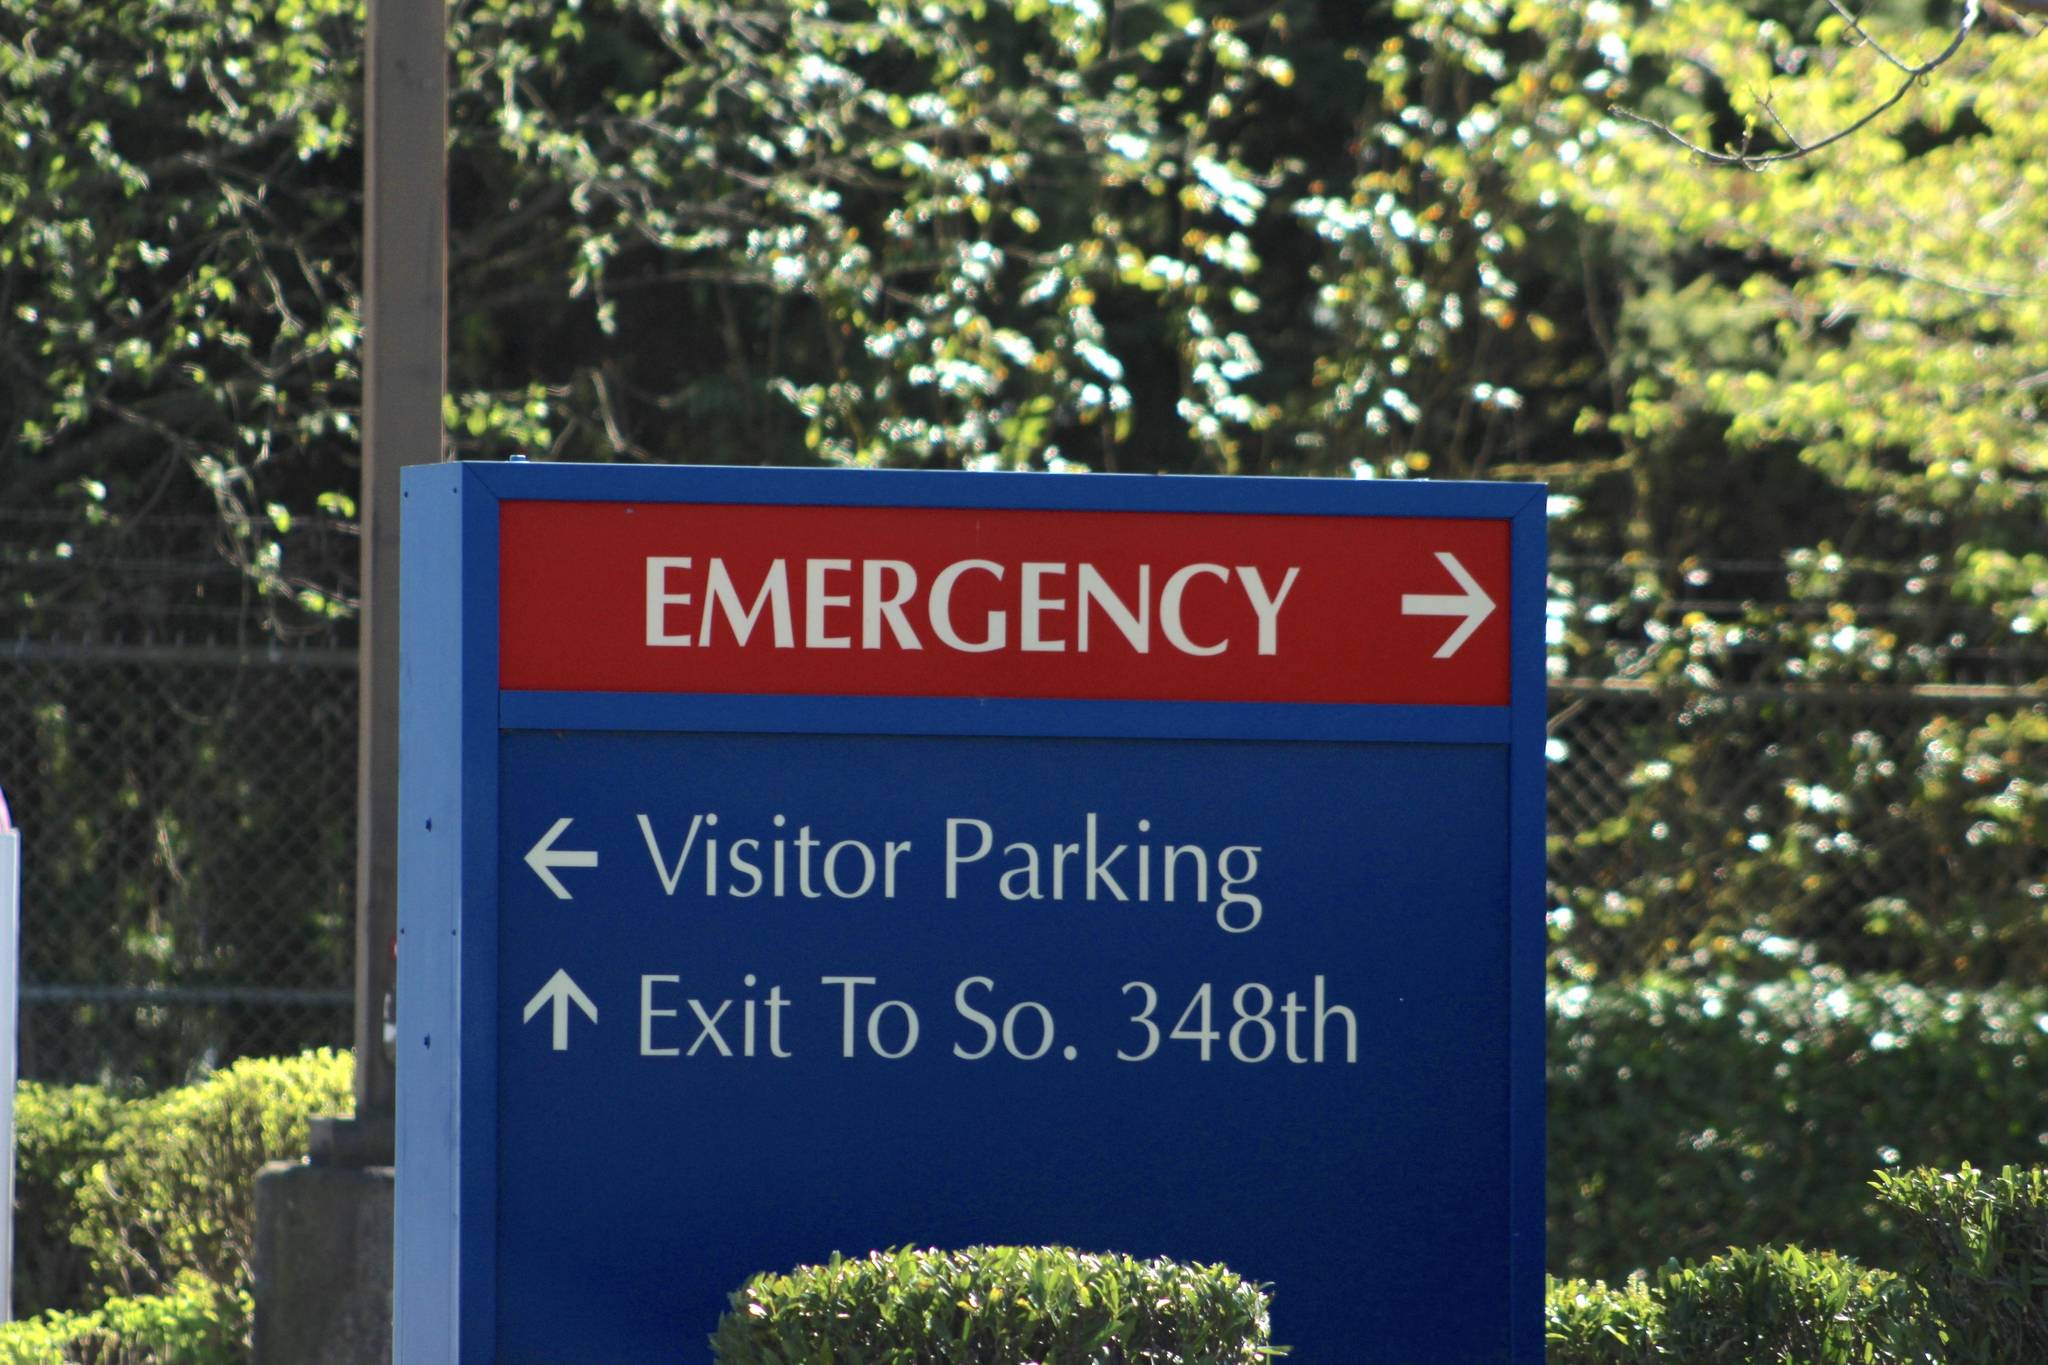 Don't avoid the emergency department in a crisis